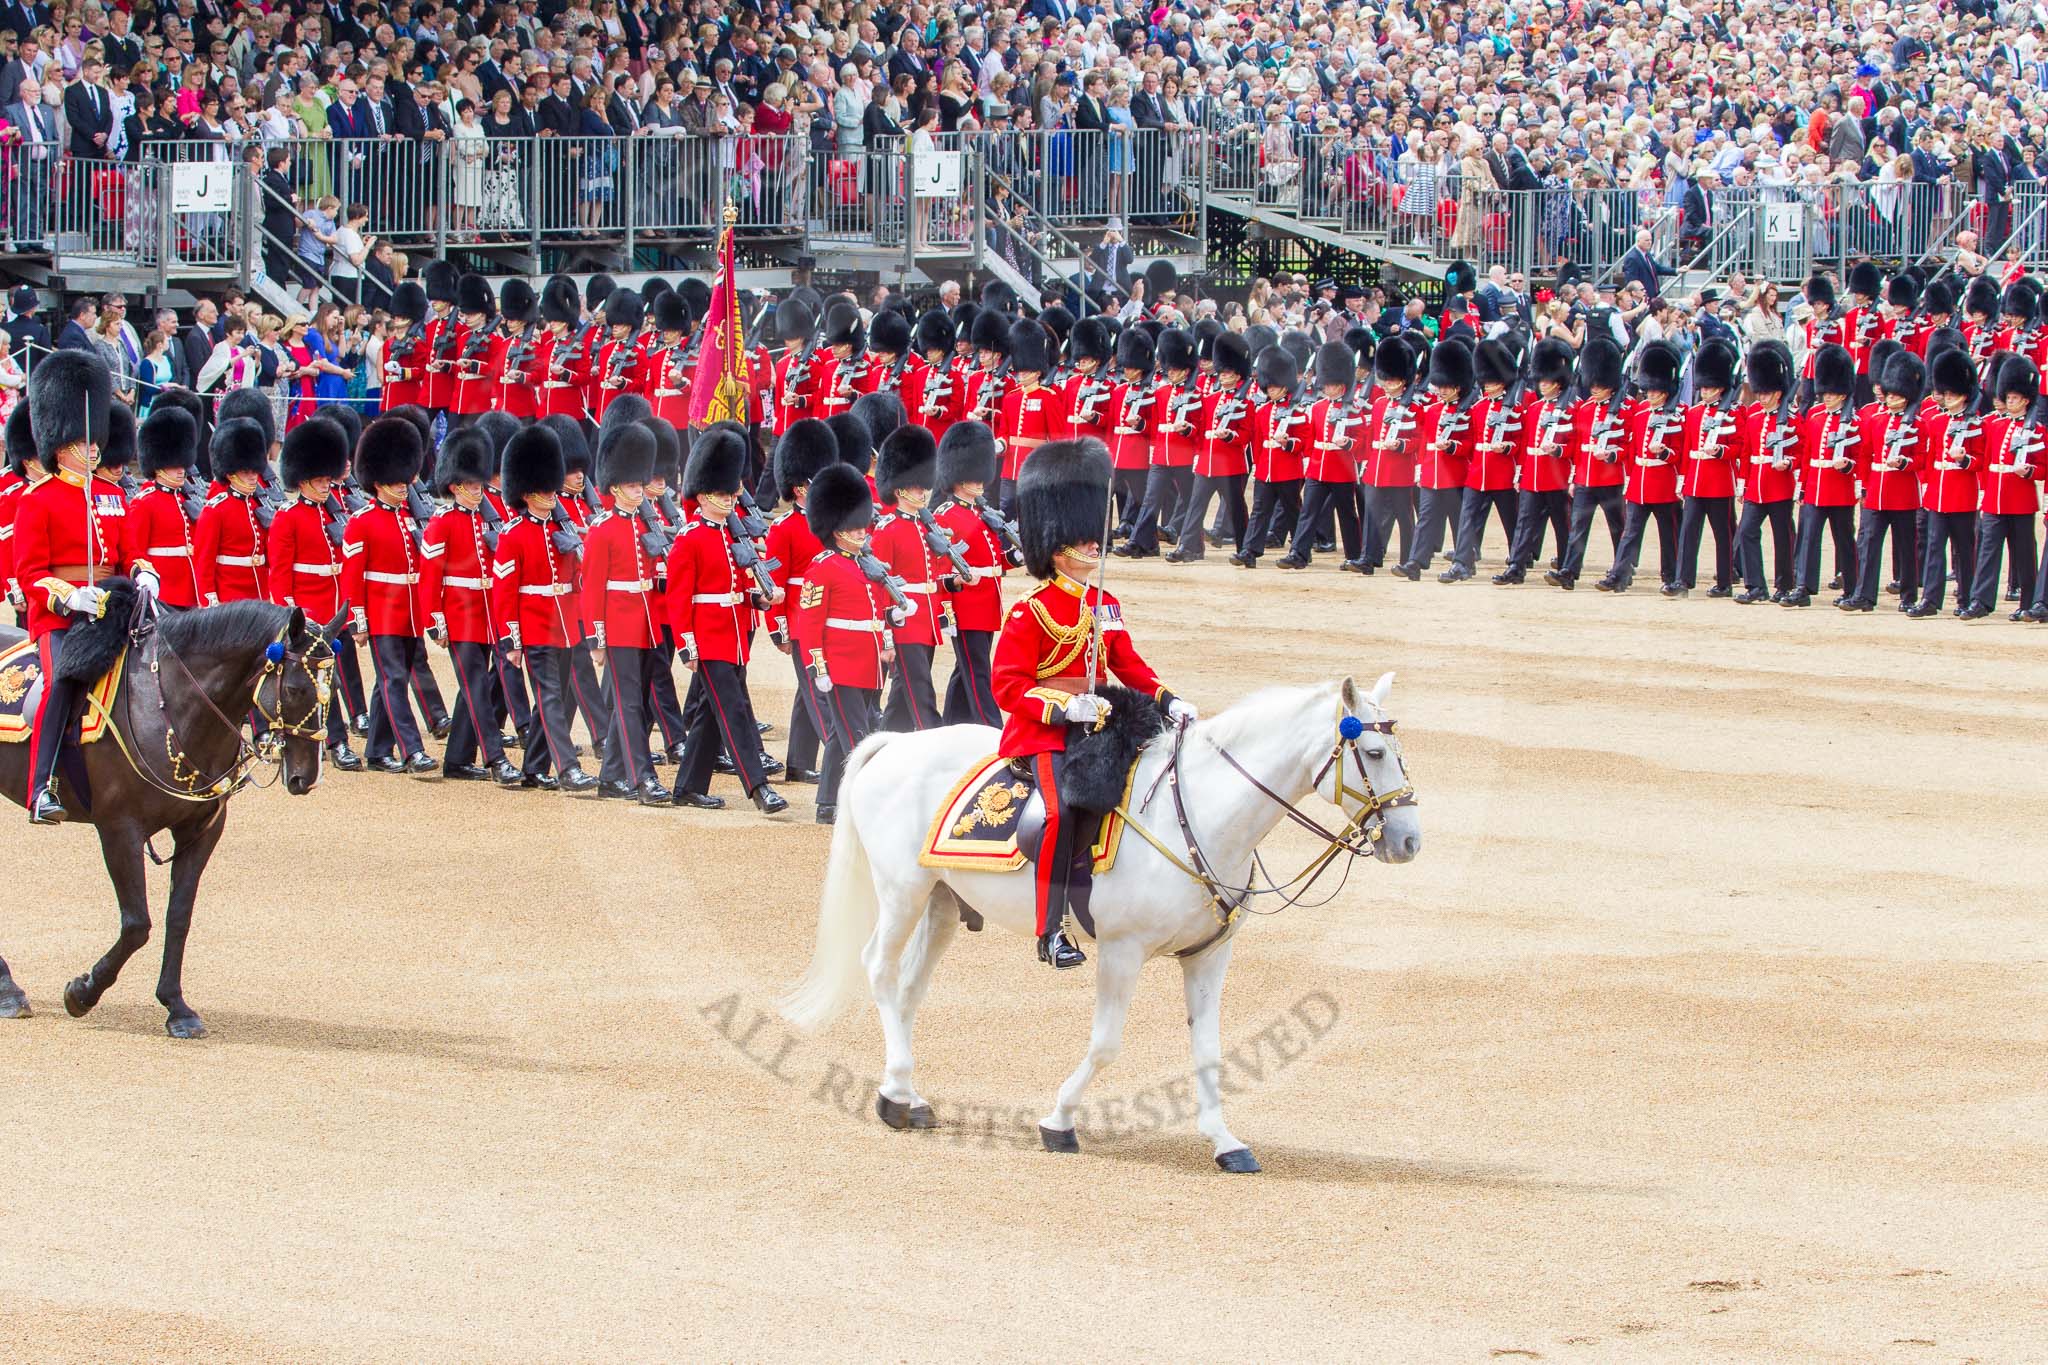 Trooping the Colour 2014.
Horse Guards Parade, Westminster,
London SW1A,

United Kingdom,
on 14 June 2014 at 11:35, image #611